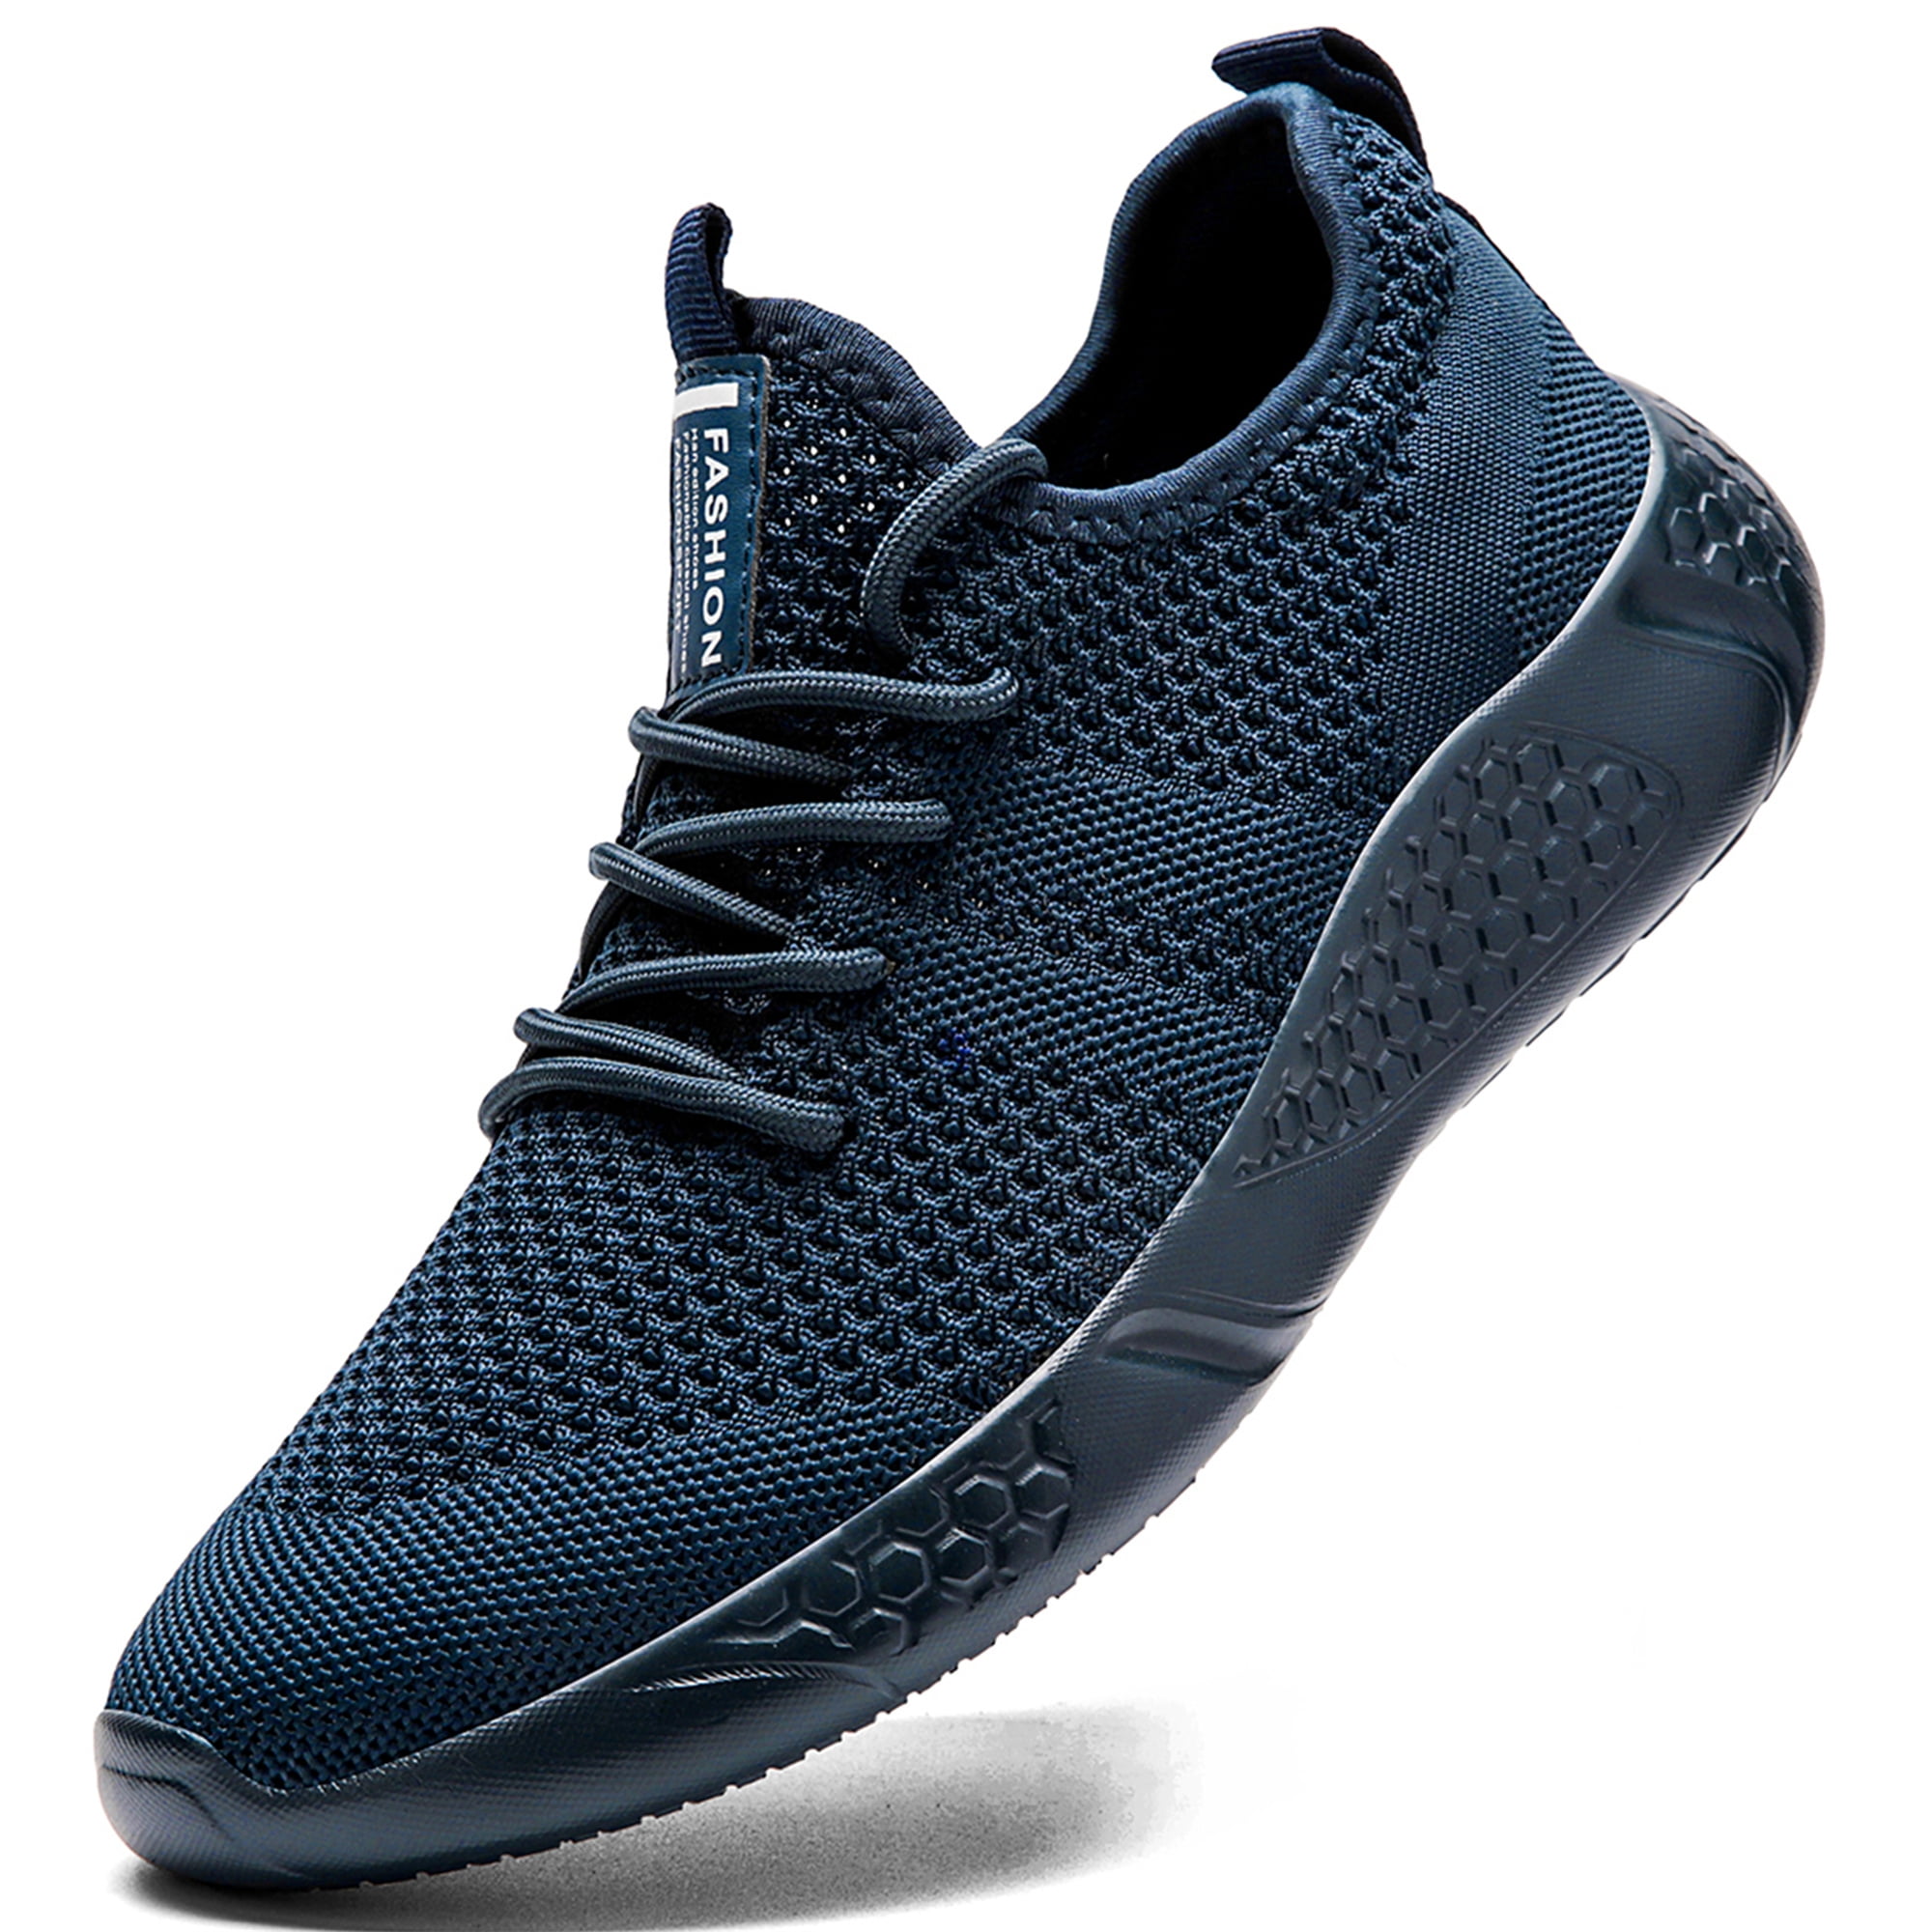 Mens Sport Running Shoes Fashion Casual Comfort Breathable Soft Sole Athletic Trial Sneakers 